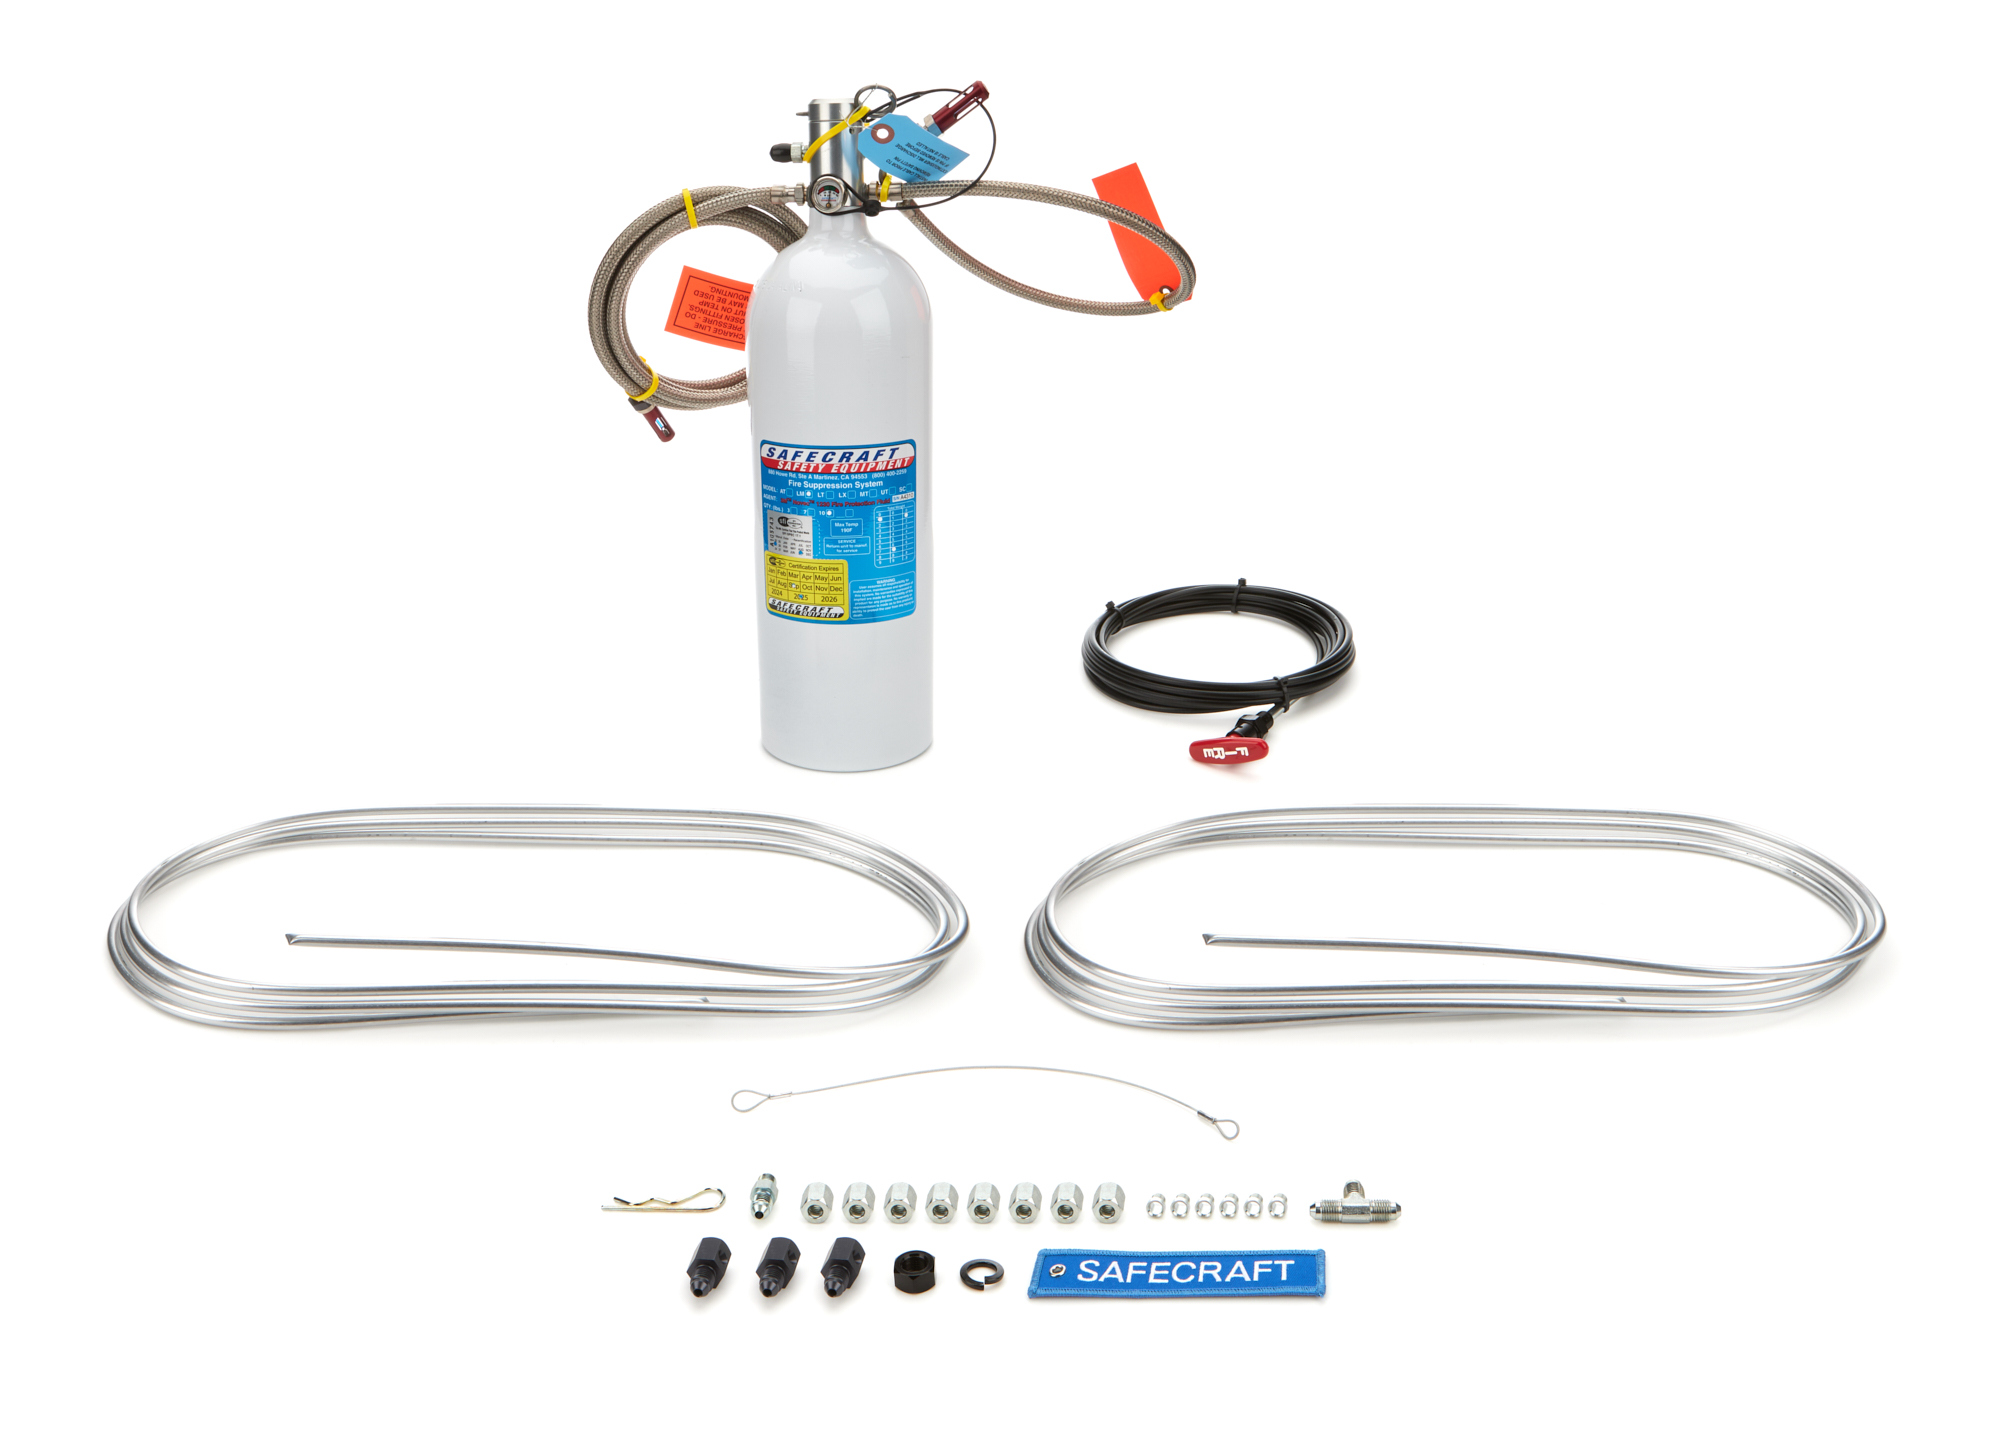 Safecraft LM10JHG-21-85-B - Fire Suppression System, AT Series, Automatic / Manual, Novec 1230, 10.0 lb Bottle, 21 in / 85 in Long Hoses, Fittings / Sensor / Pull Cable Included, Kit